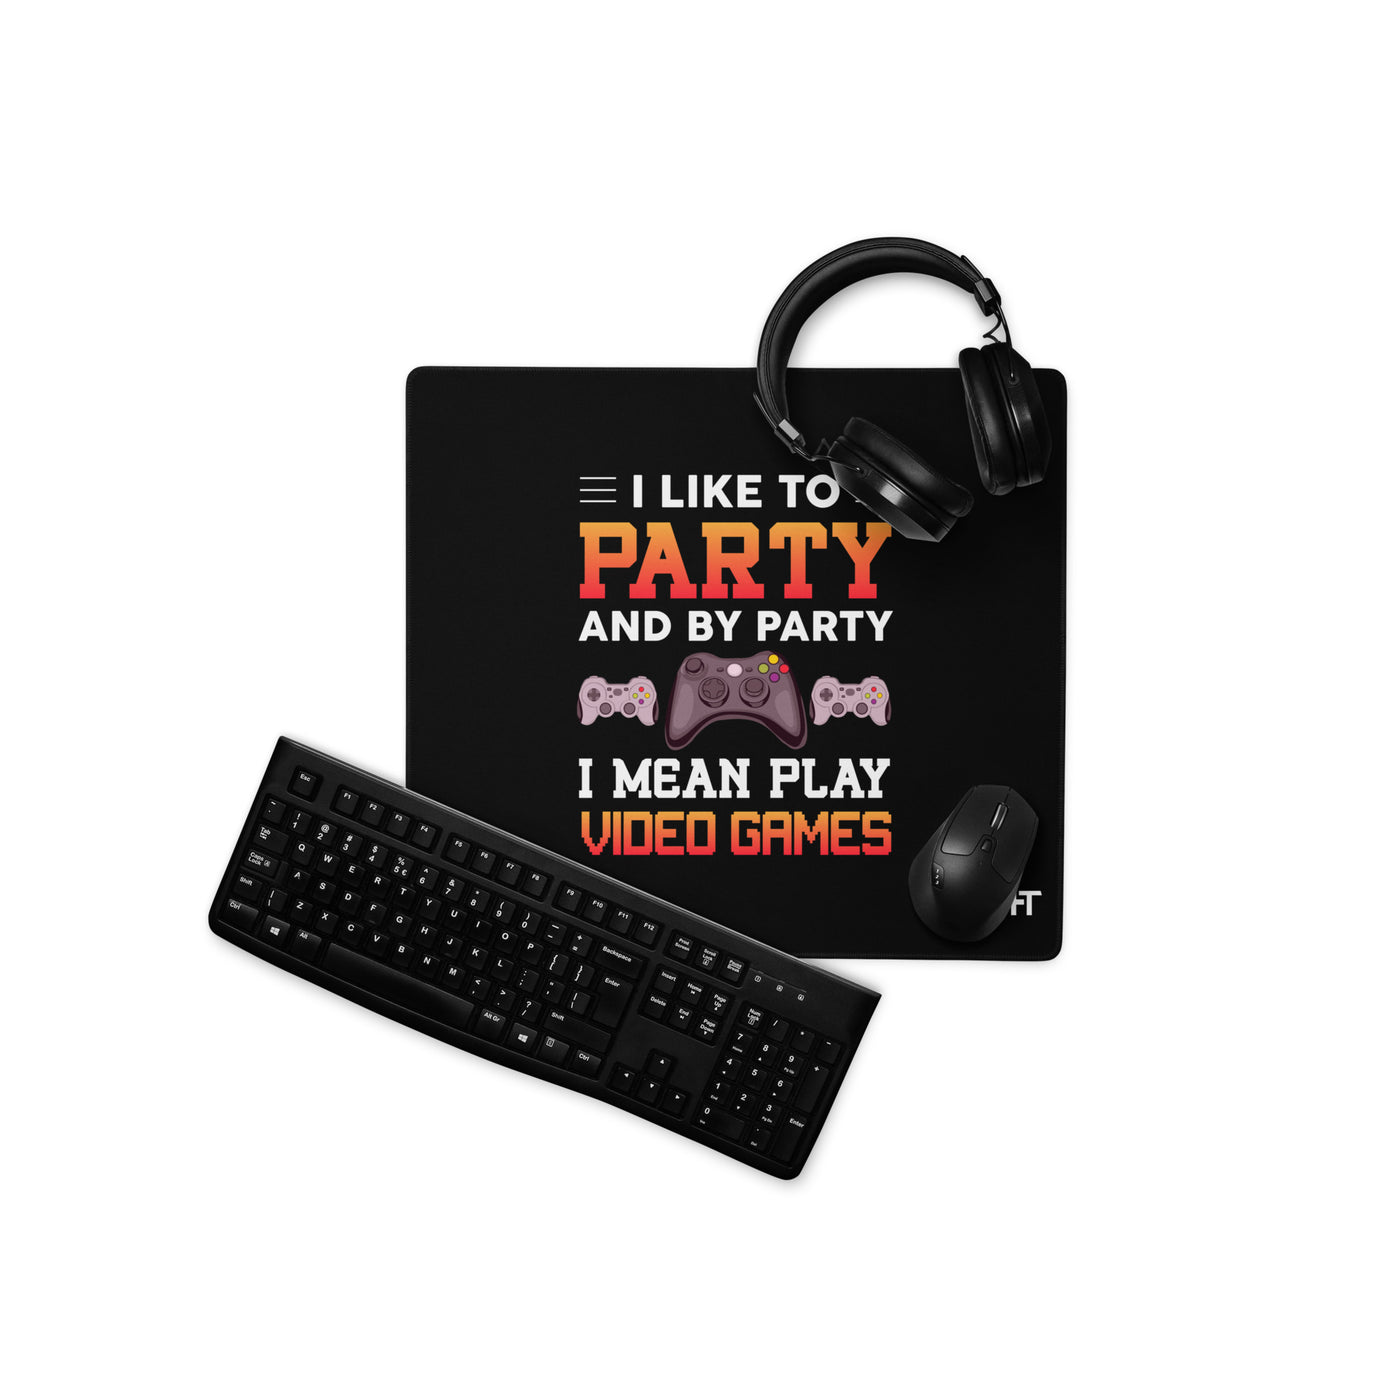 I Like to Party and by Party, I mean Play Video Games - Desk Mat